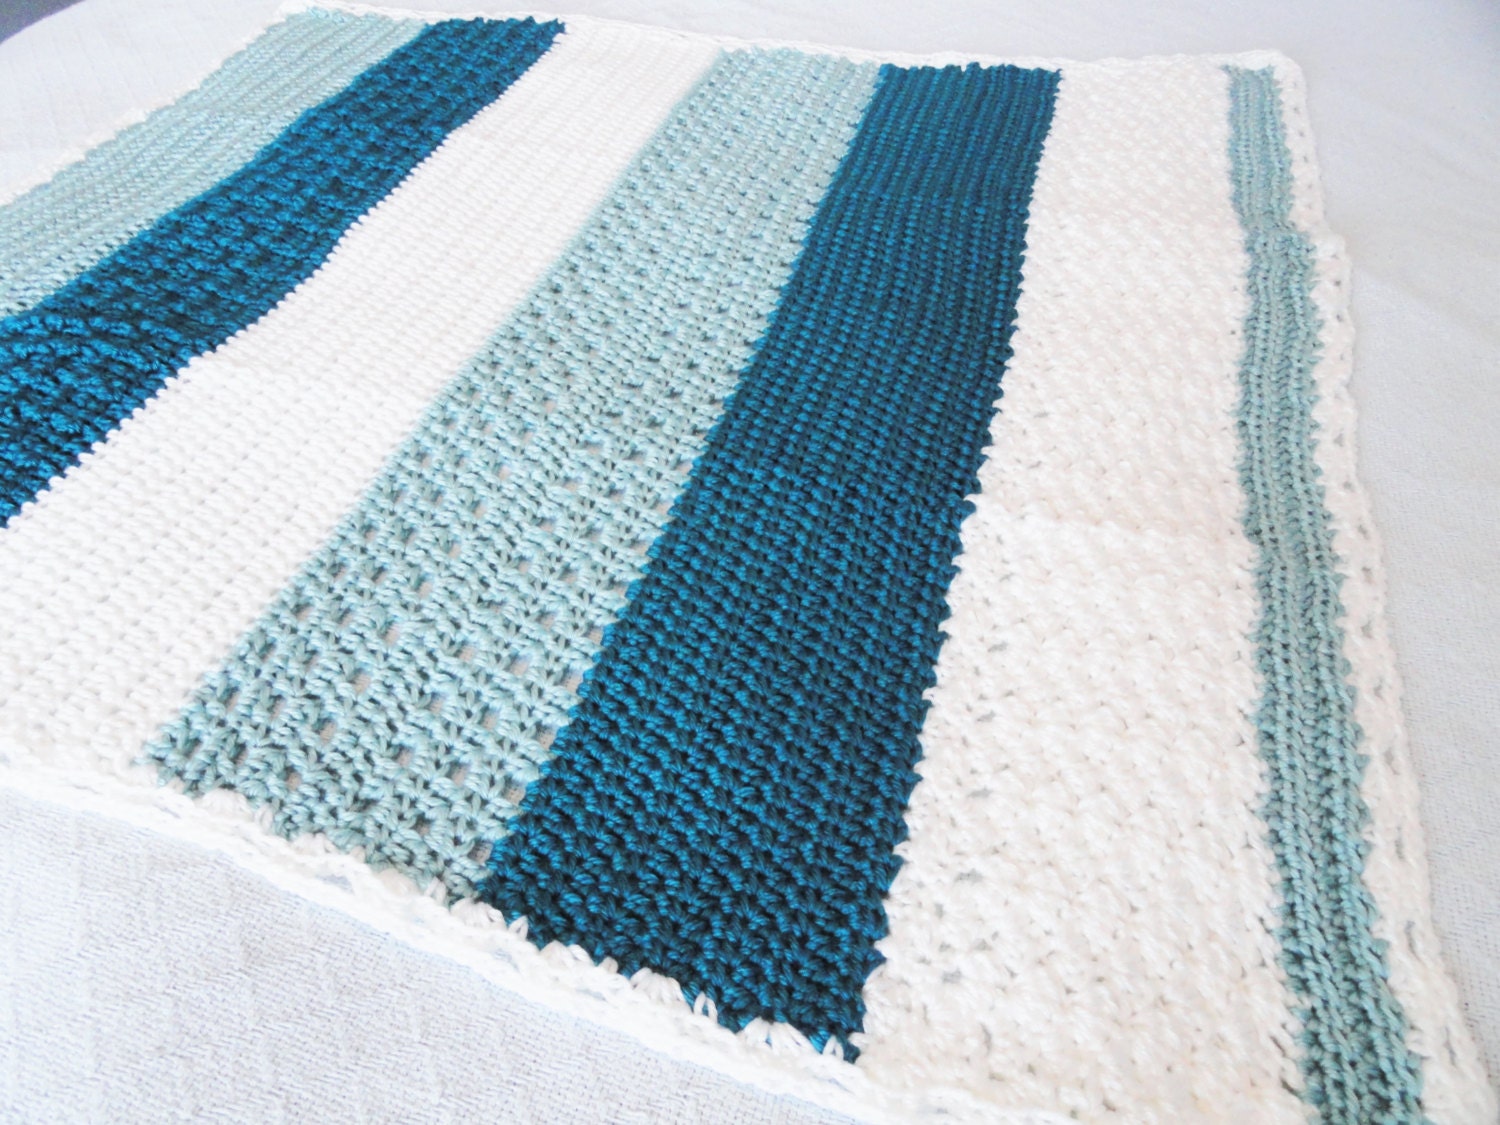 Teal Blue Striped Crocheted Afghan Baby Blanket Office Lap - Etsy